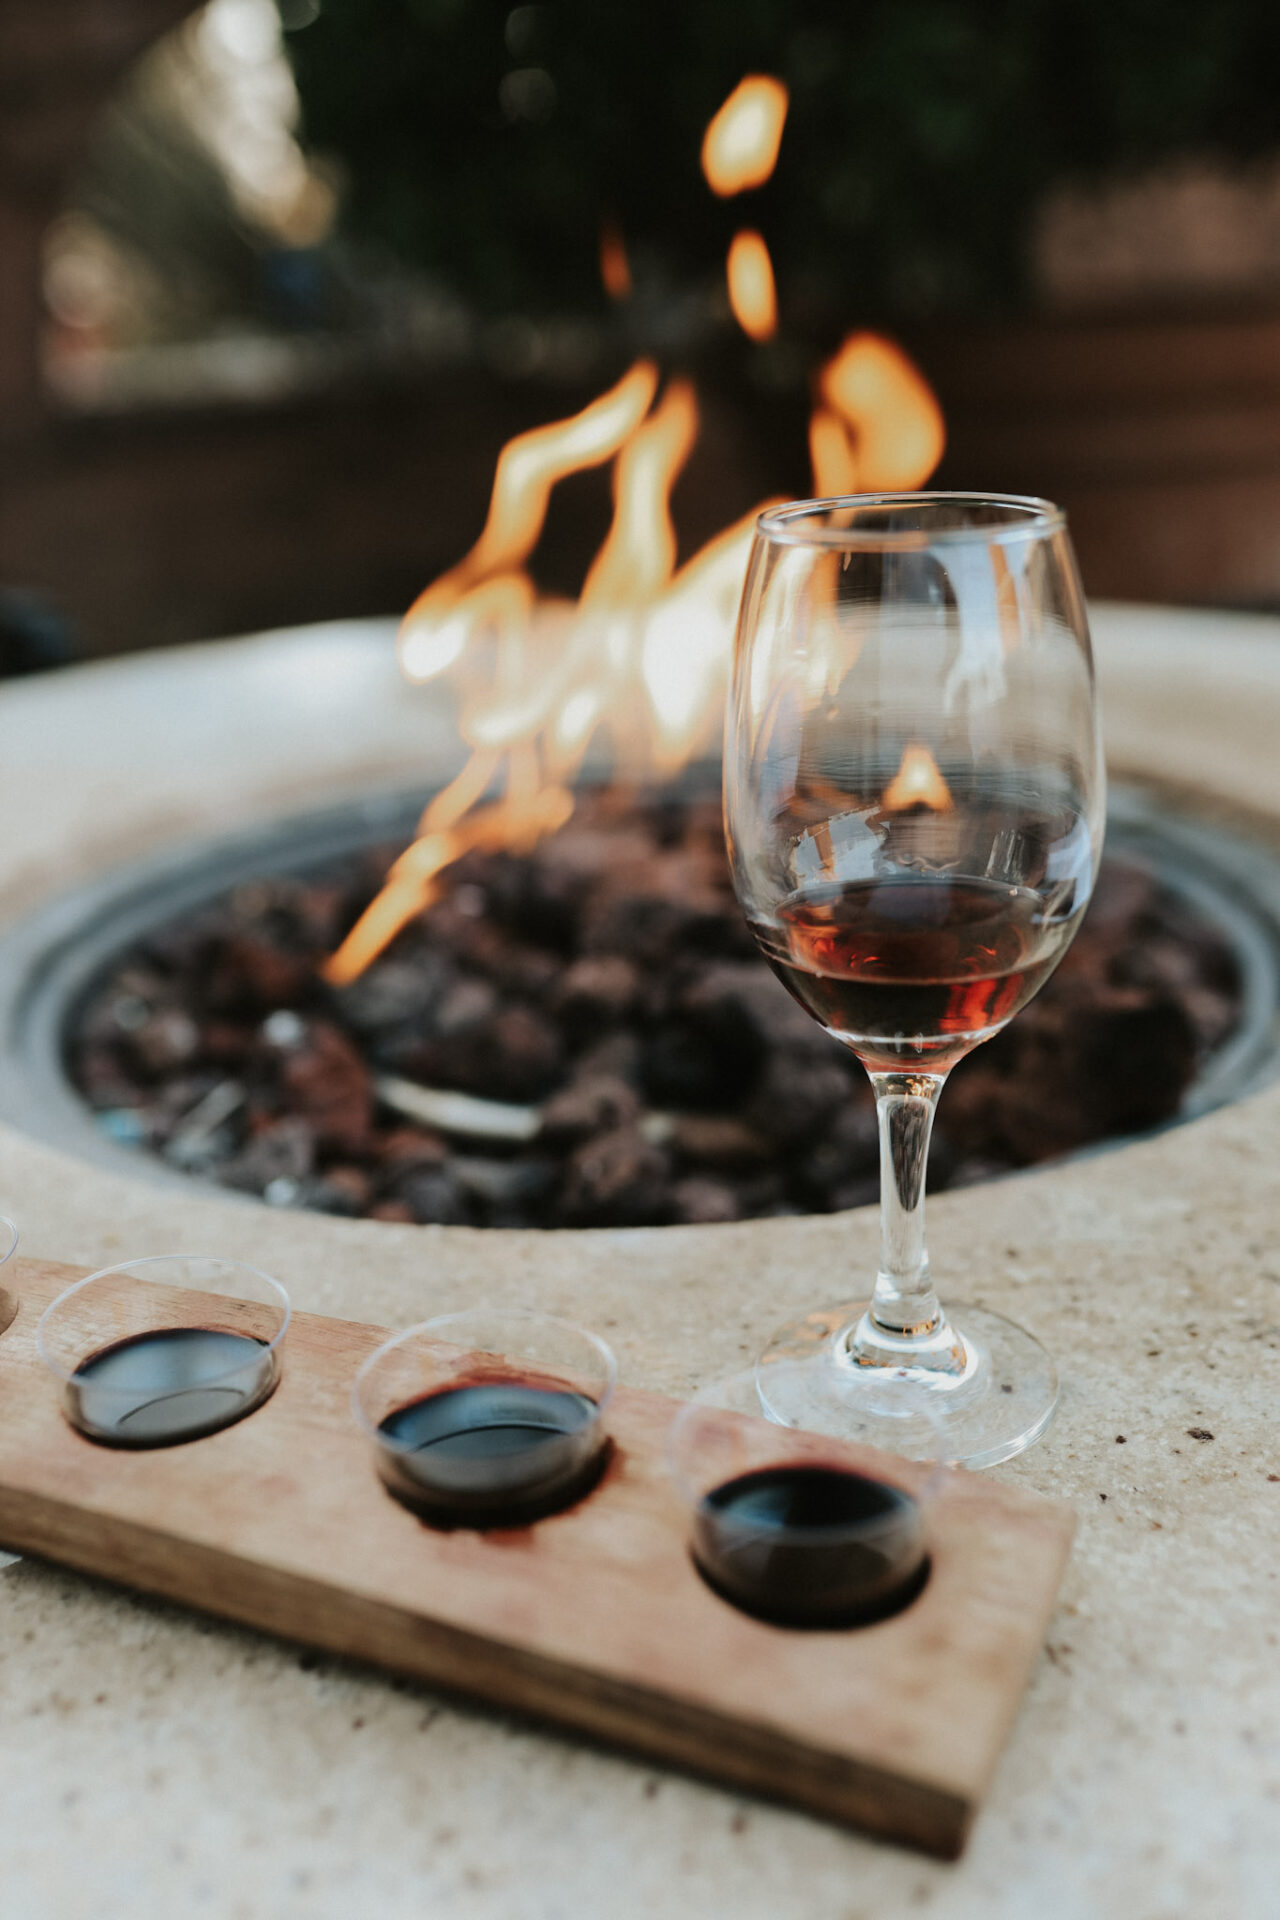 Viaggio tasting flight in front of fire pit